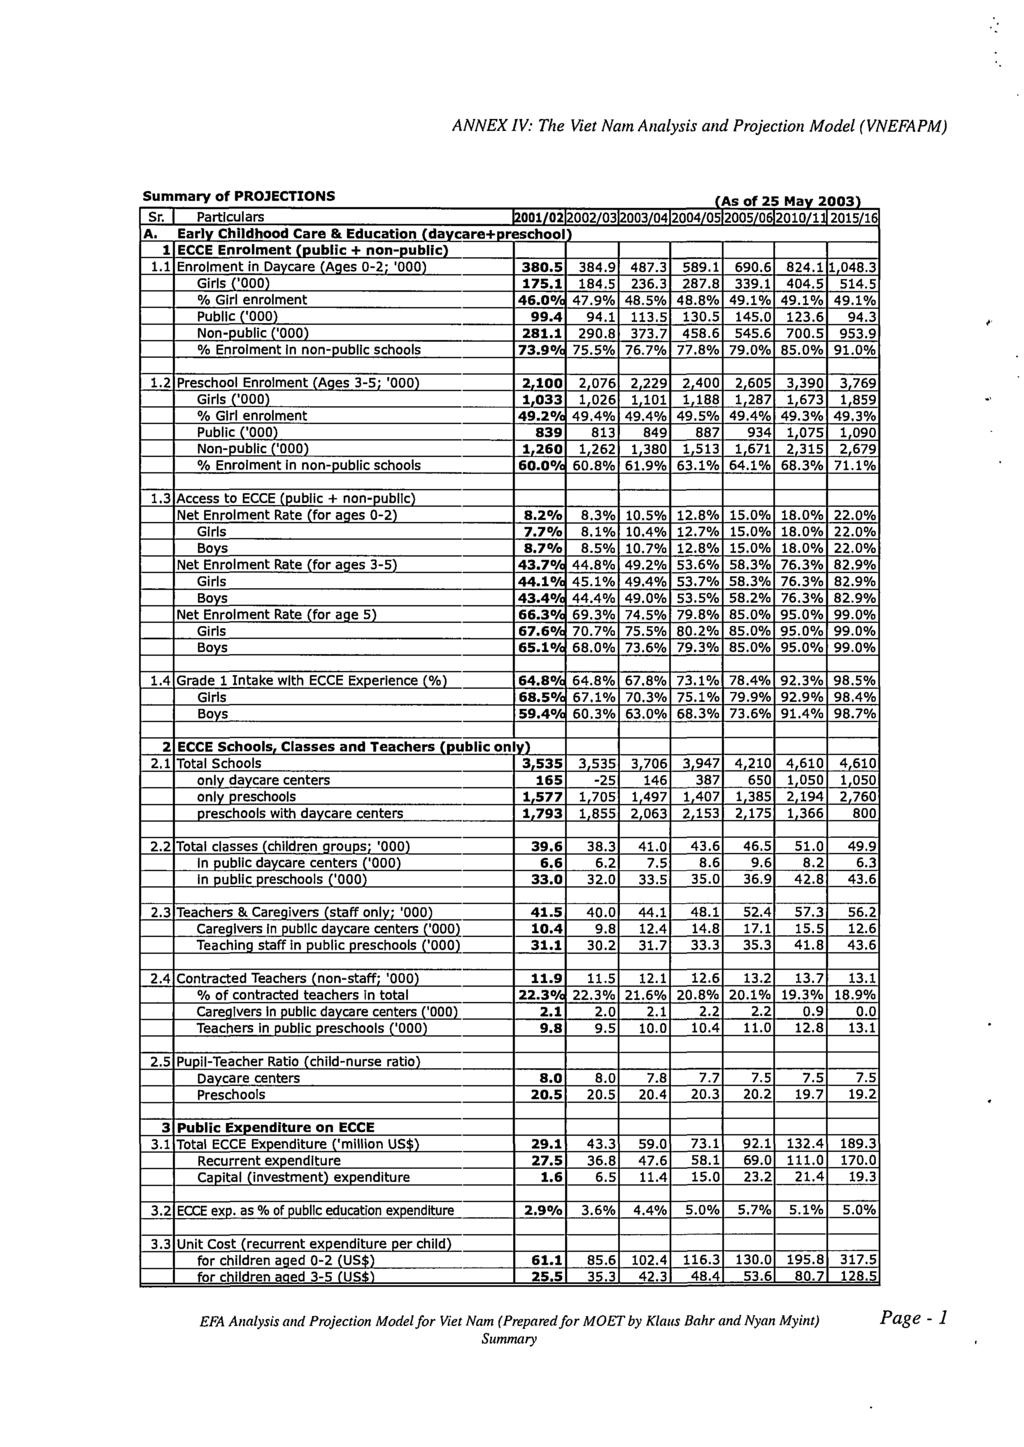 ANNEX IV: The Viet Nam Analysis and Projection Model (VNEFAPM) Summary of PROJECTIONS (As of 25 May 2003) Sr. I Partlculars 2001/02 2002/03 2003/04 2004/05 2005/06 2010/1_J 2015/16 A.